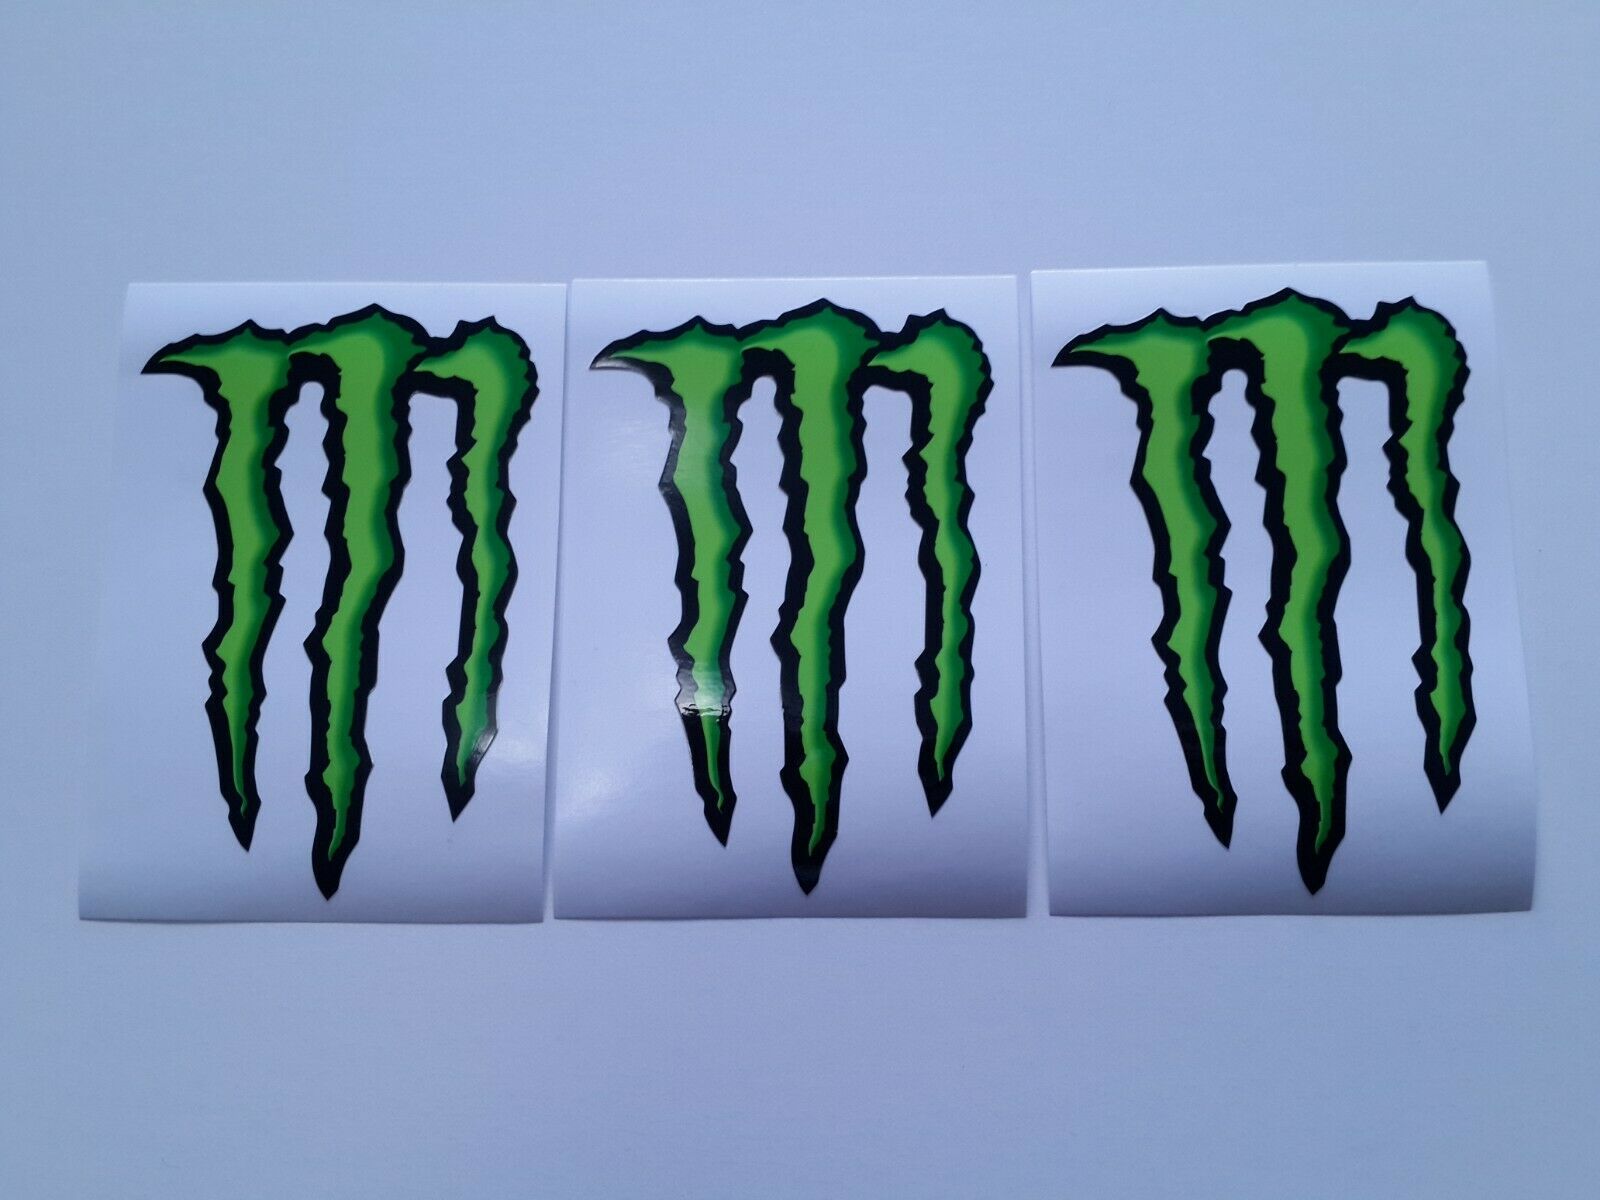 5 Set 5x Monster Energy Drink 4" Sticker Decal Motorcycles Cars Trucks 4x4 M1